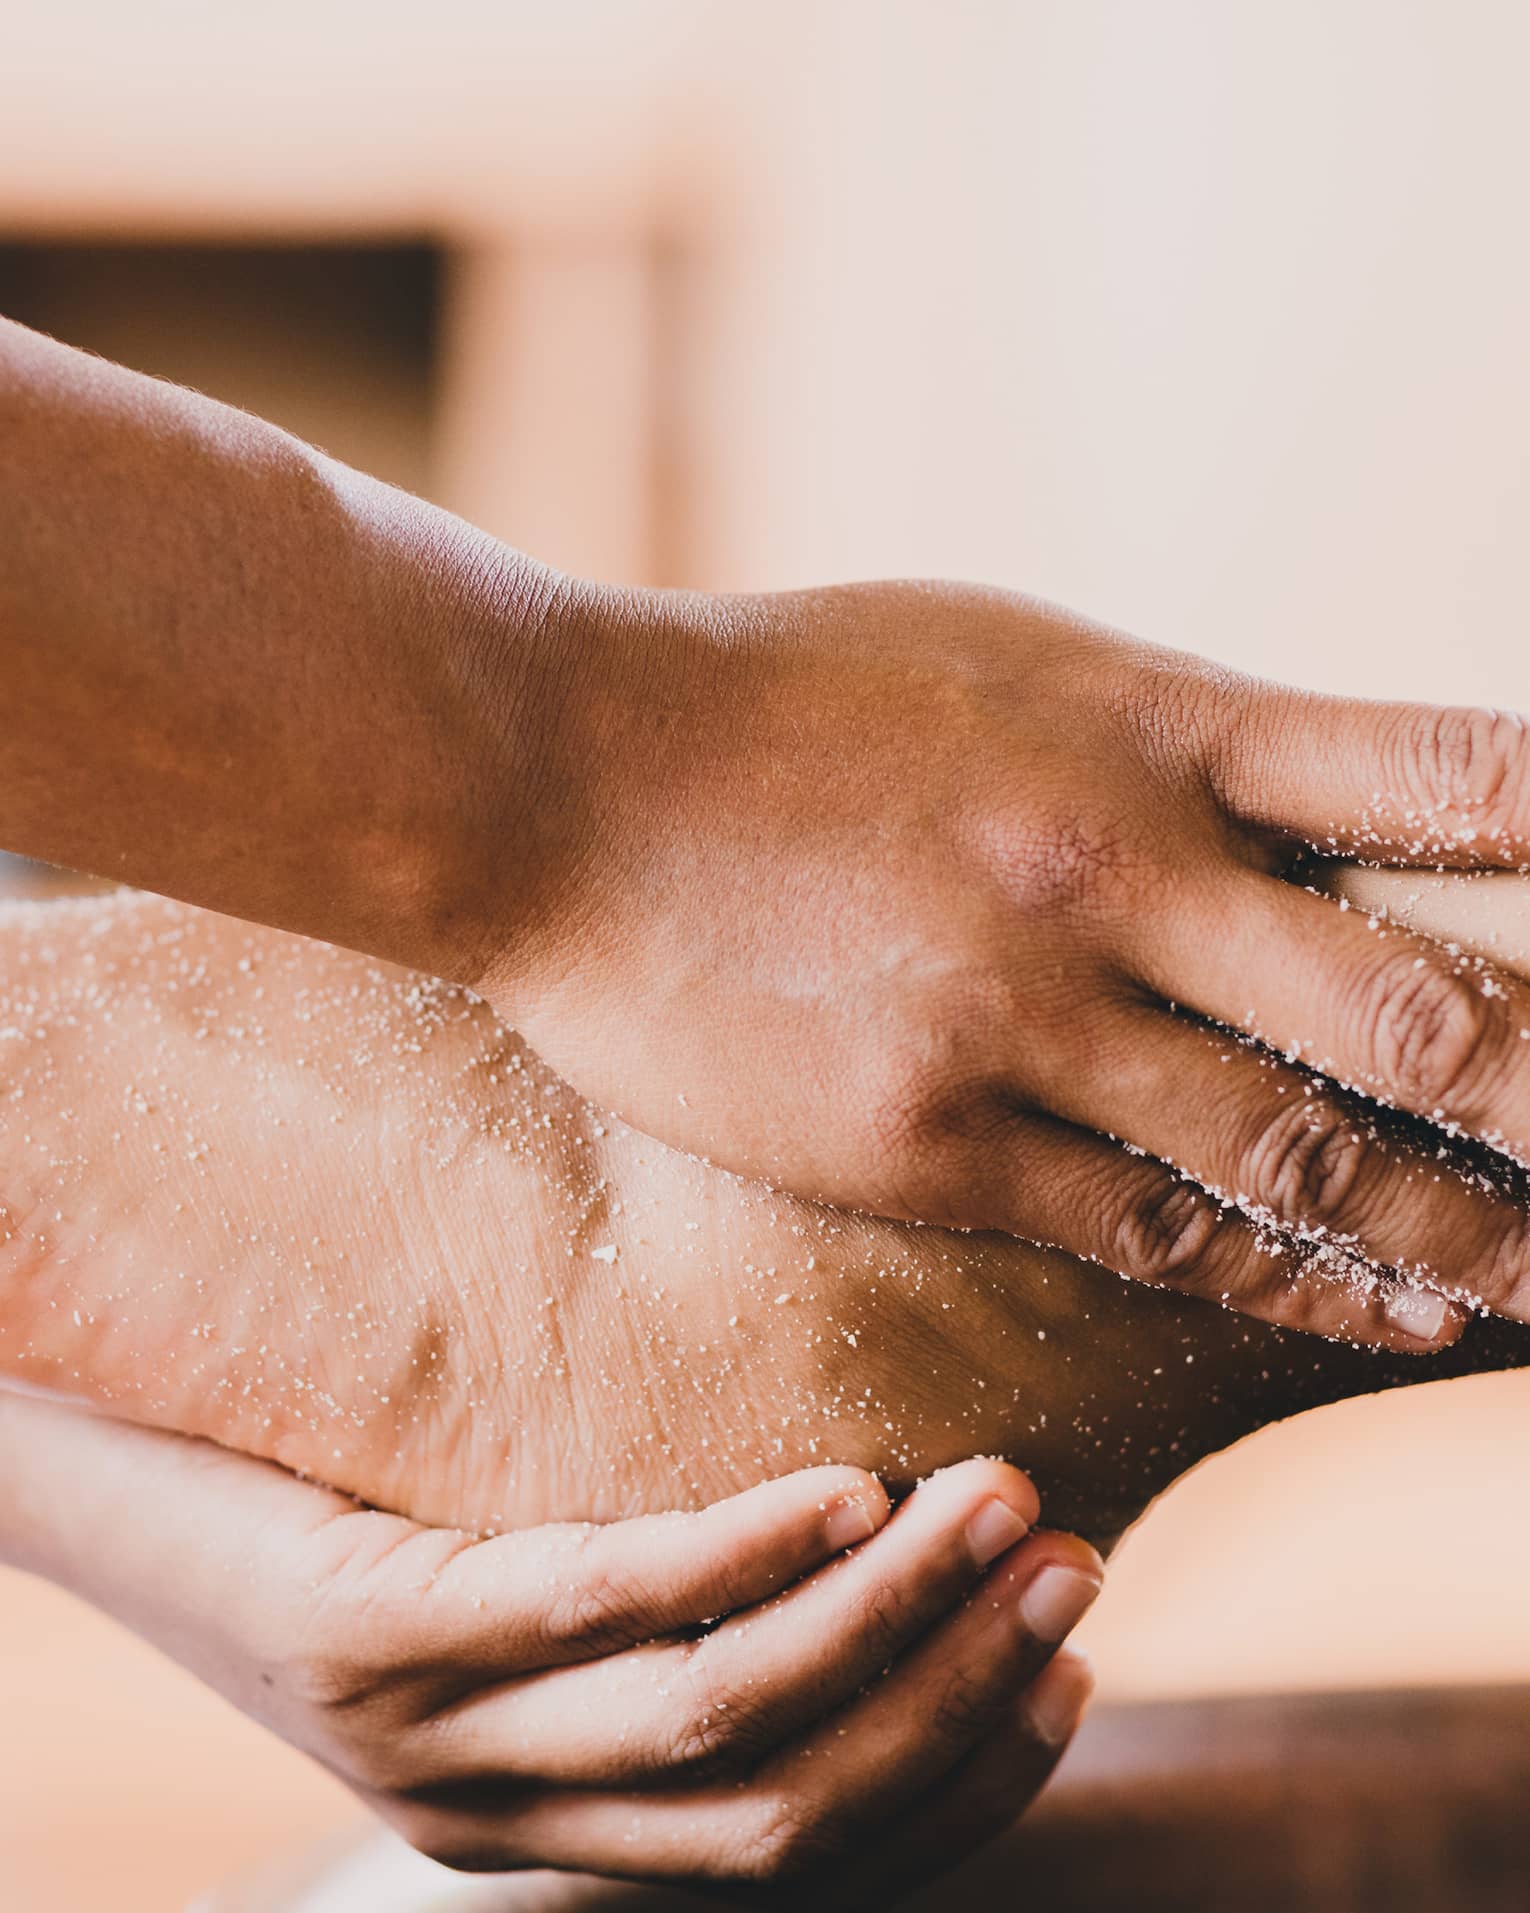 Hands hold a person's foot and ankle in a spa